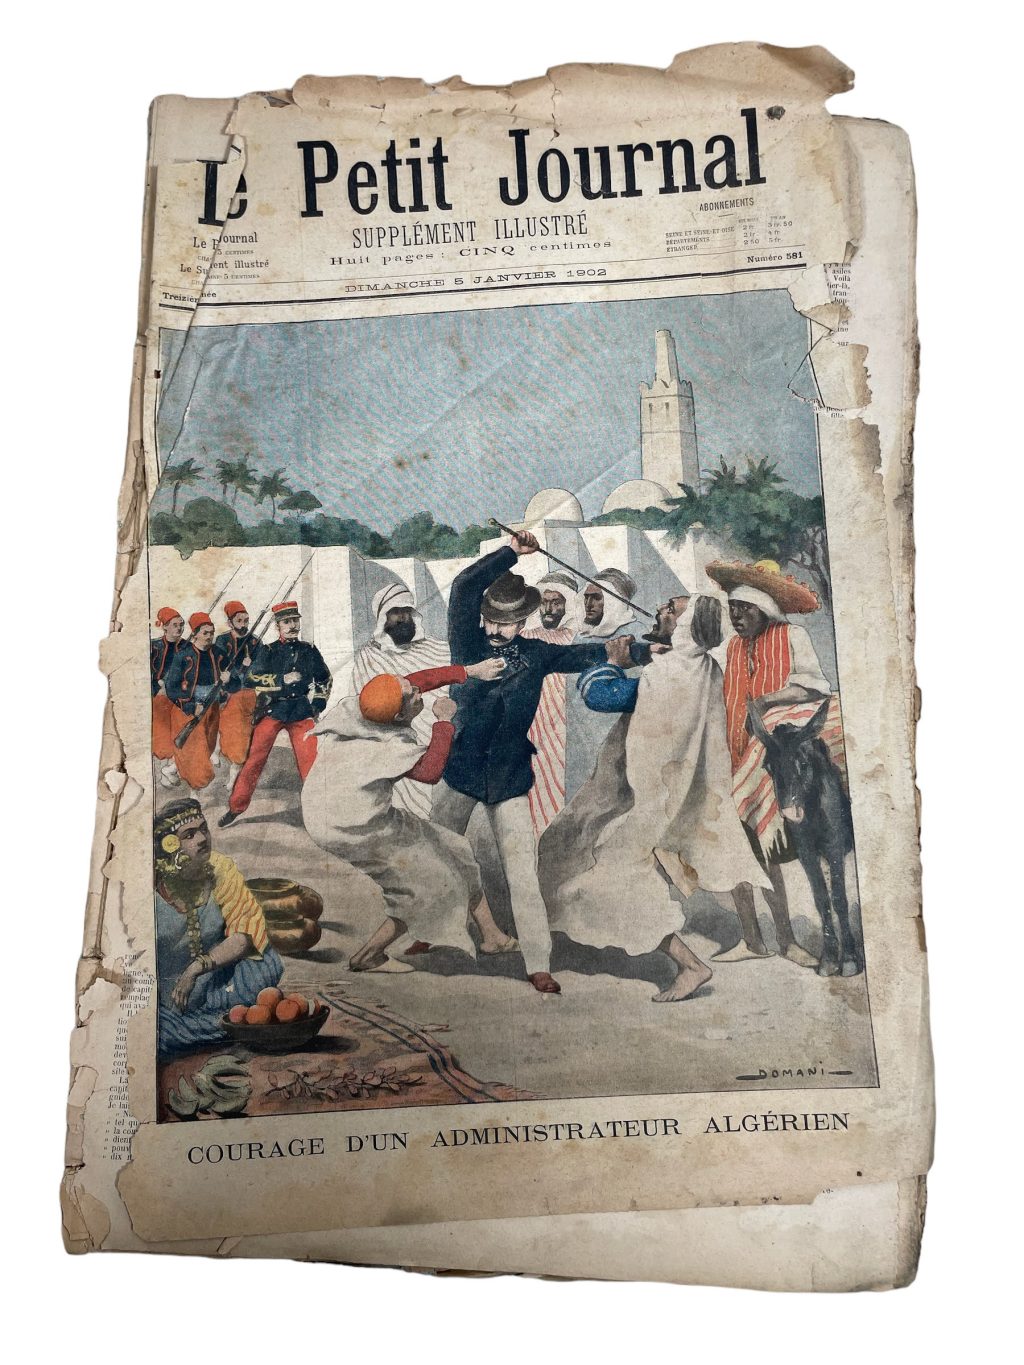 Antique French Job Lot Le Petit Journal Newspaper Supplement Illustre Number 581 to 632 Illustrations 8 Pages Per Edition Year 1902